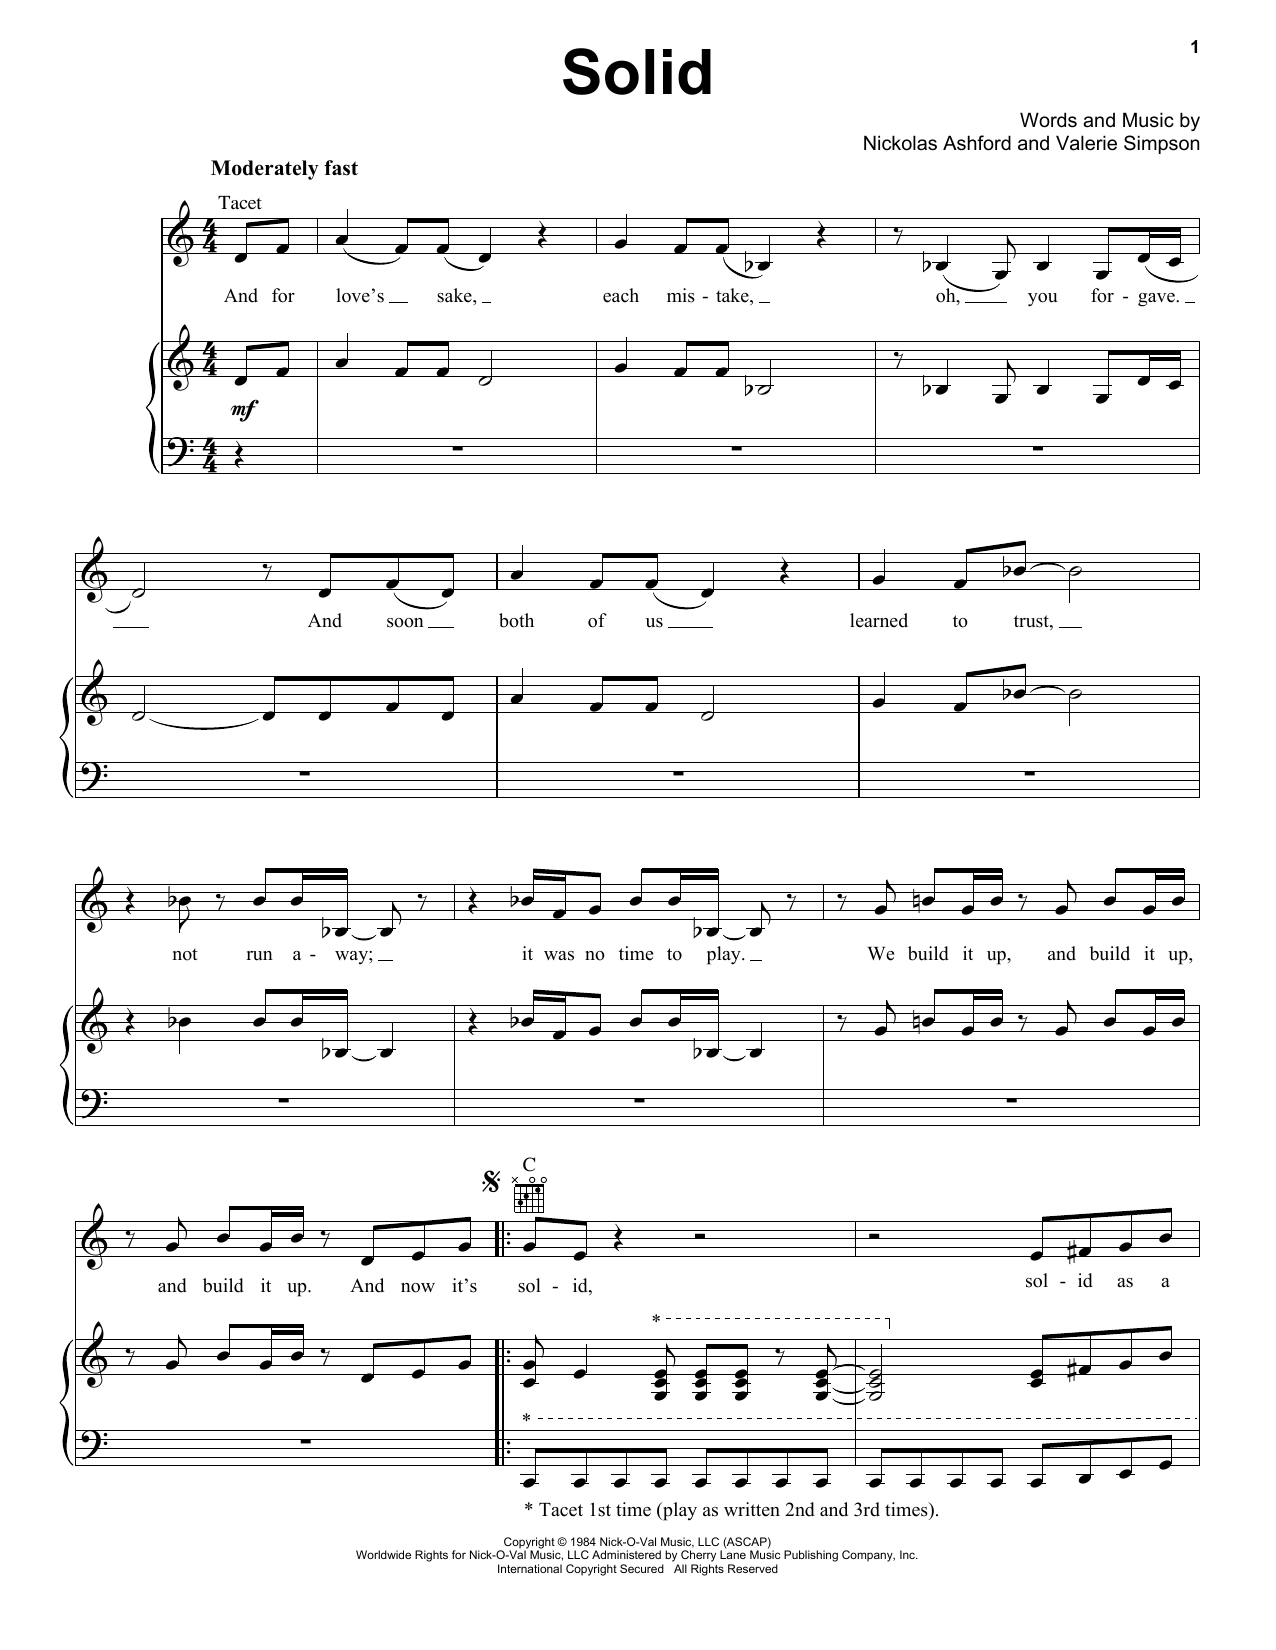 Solid sheet music